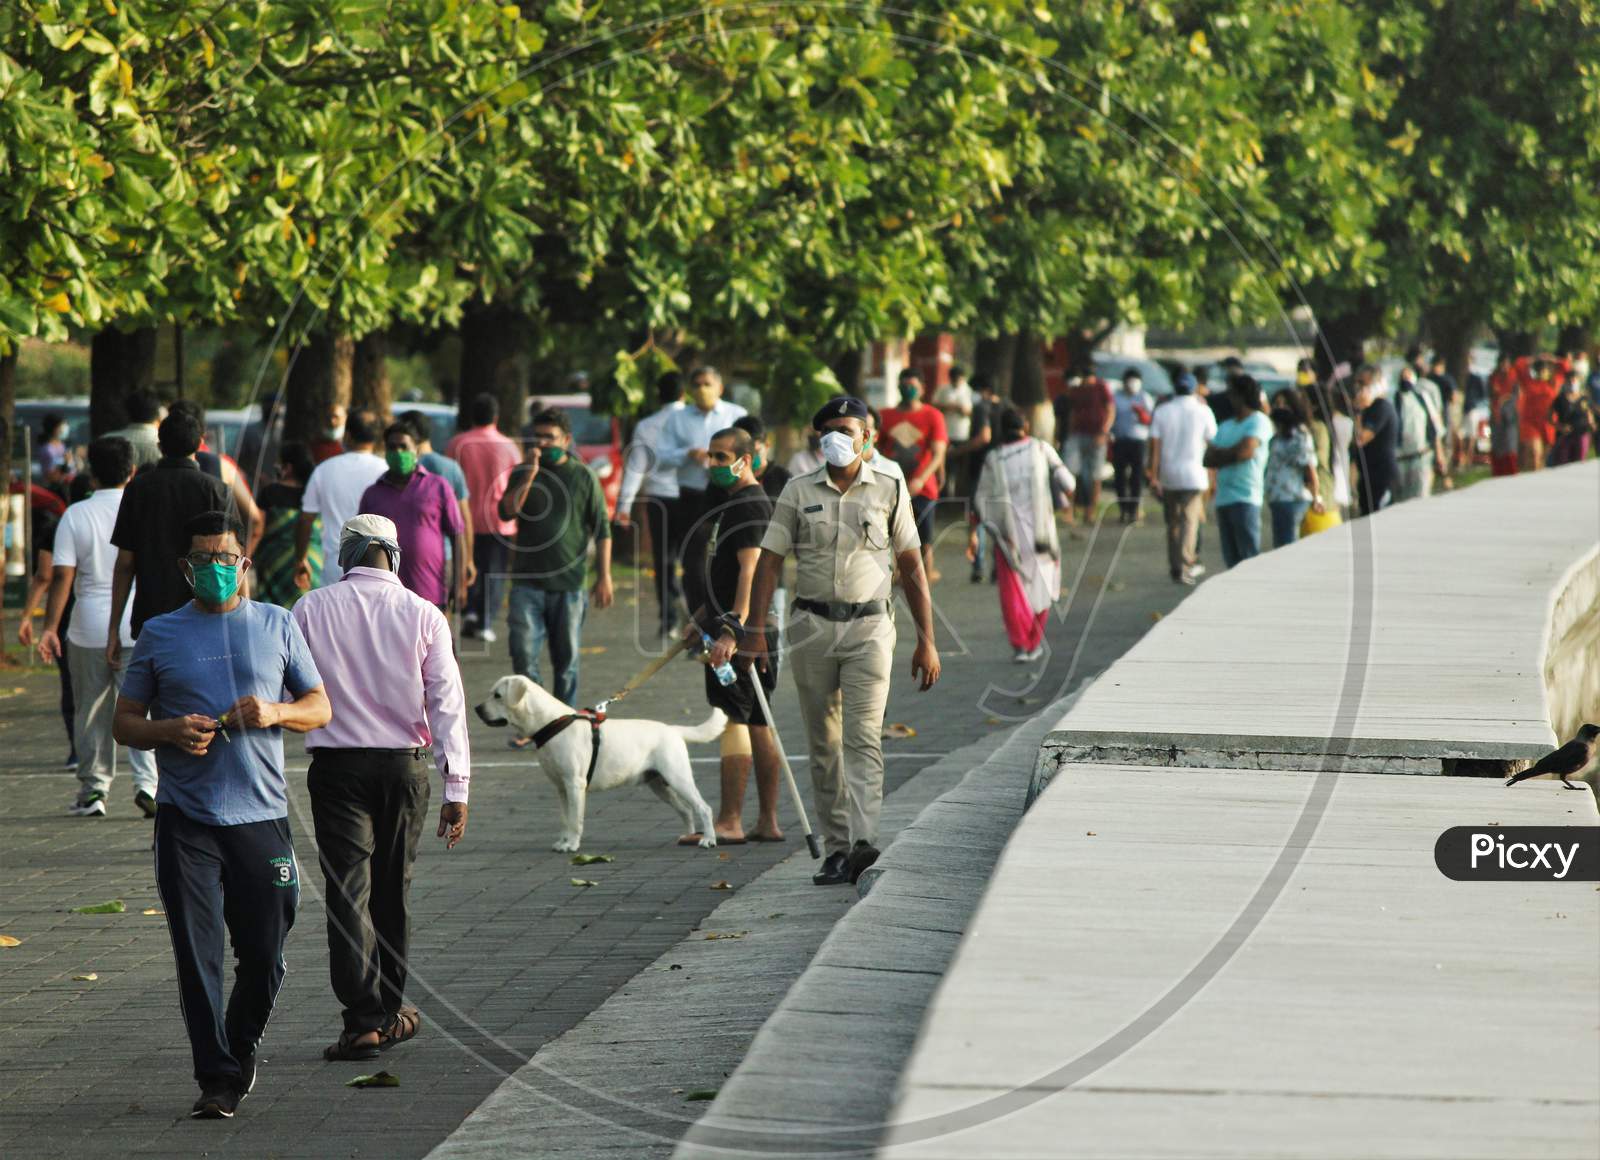 People walk along the promenade at Marine Drive after some restrictions were lifted, in Mumbai, India on June 6, 2020.